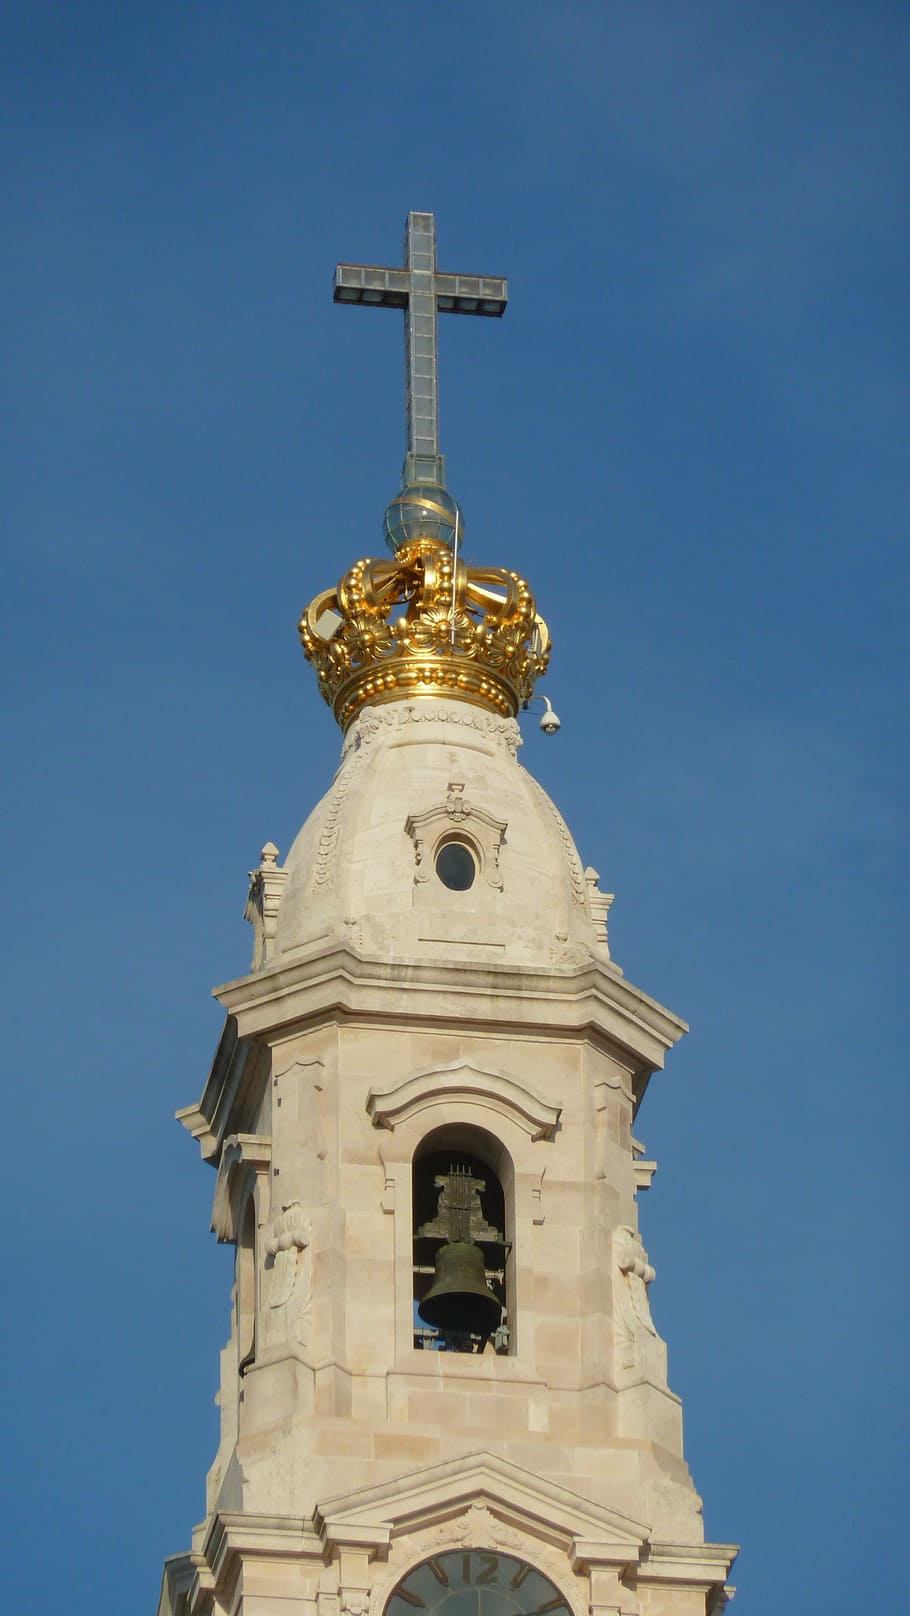 steeple, cross, crown, belfry, bell tower, architecture, architectural, church fatima, portugal, belief